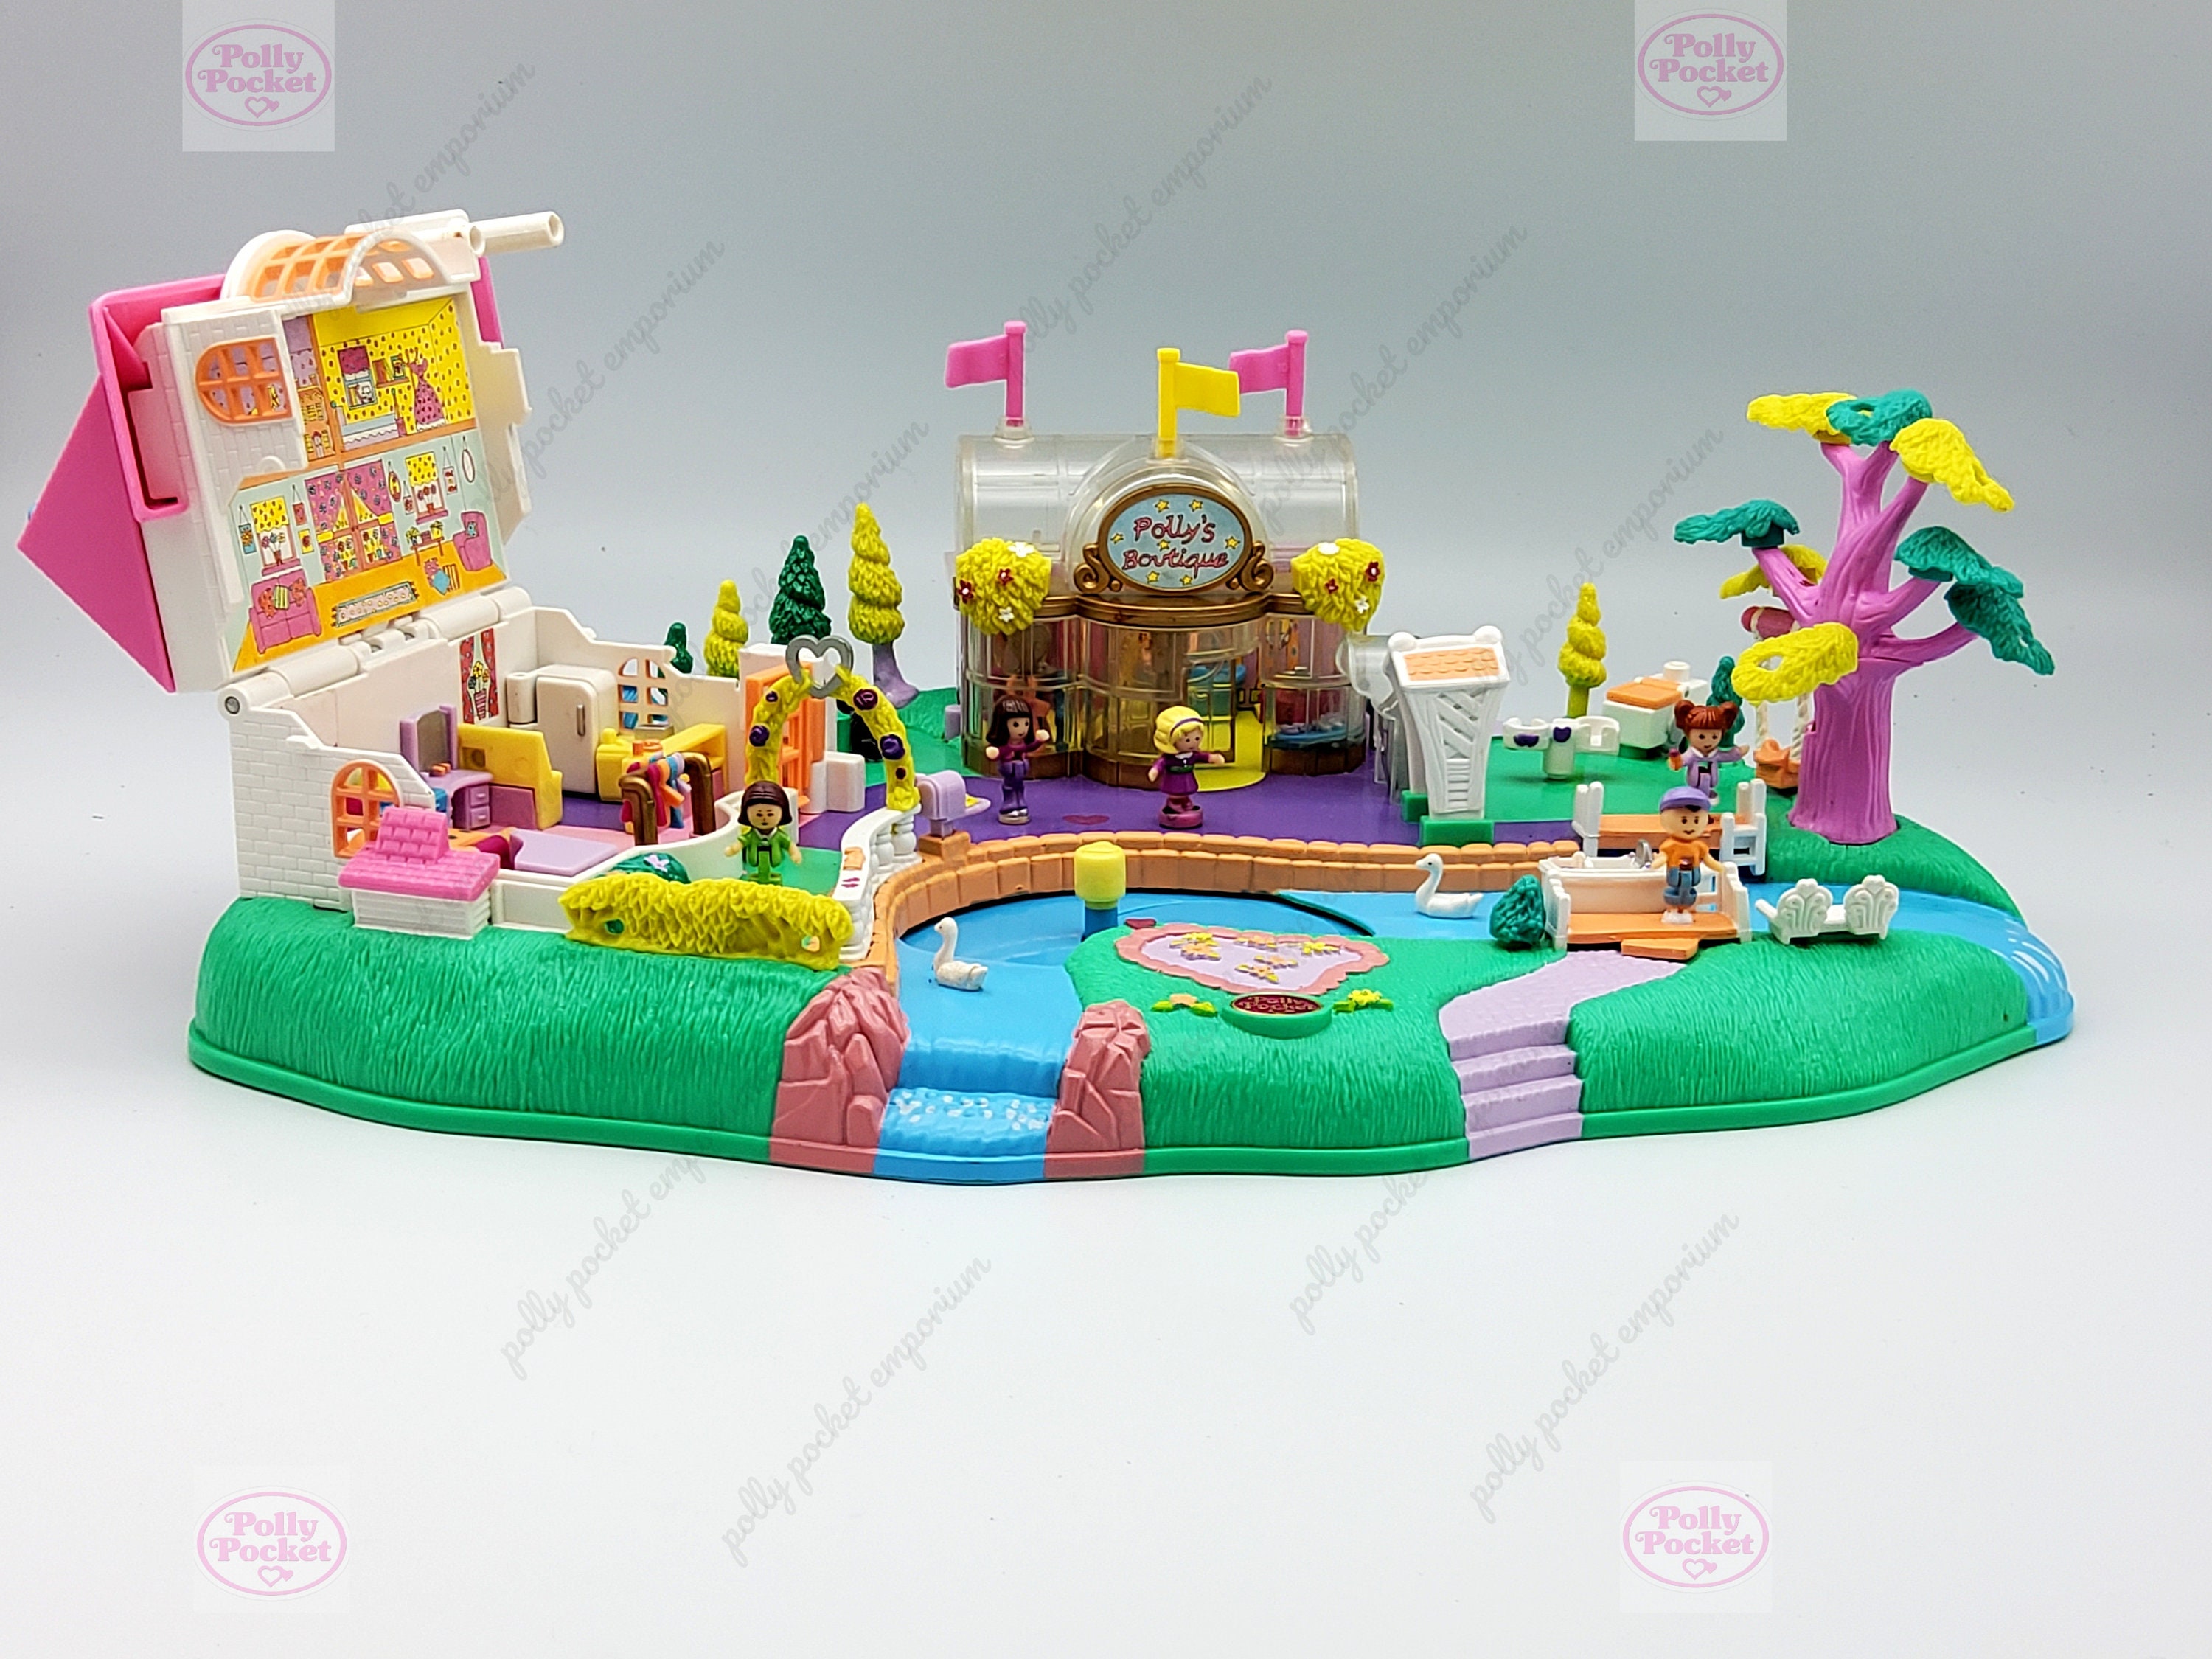 Polly Pocket Pollyville Doll and Vehicle Case of 8